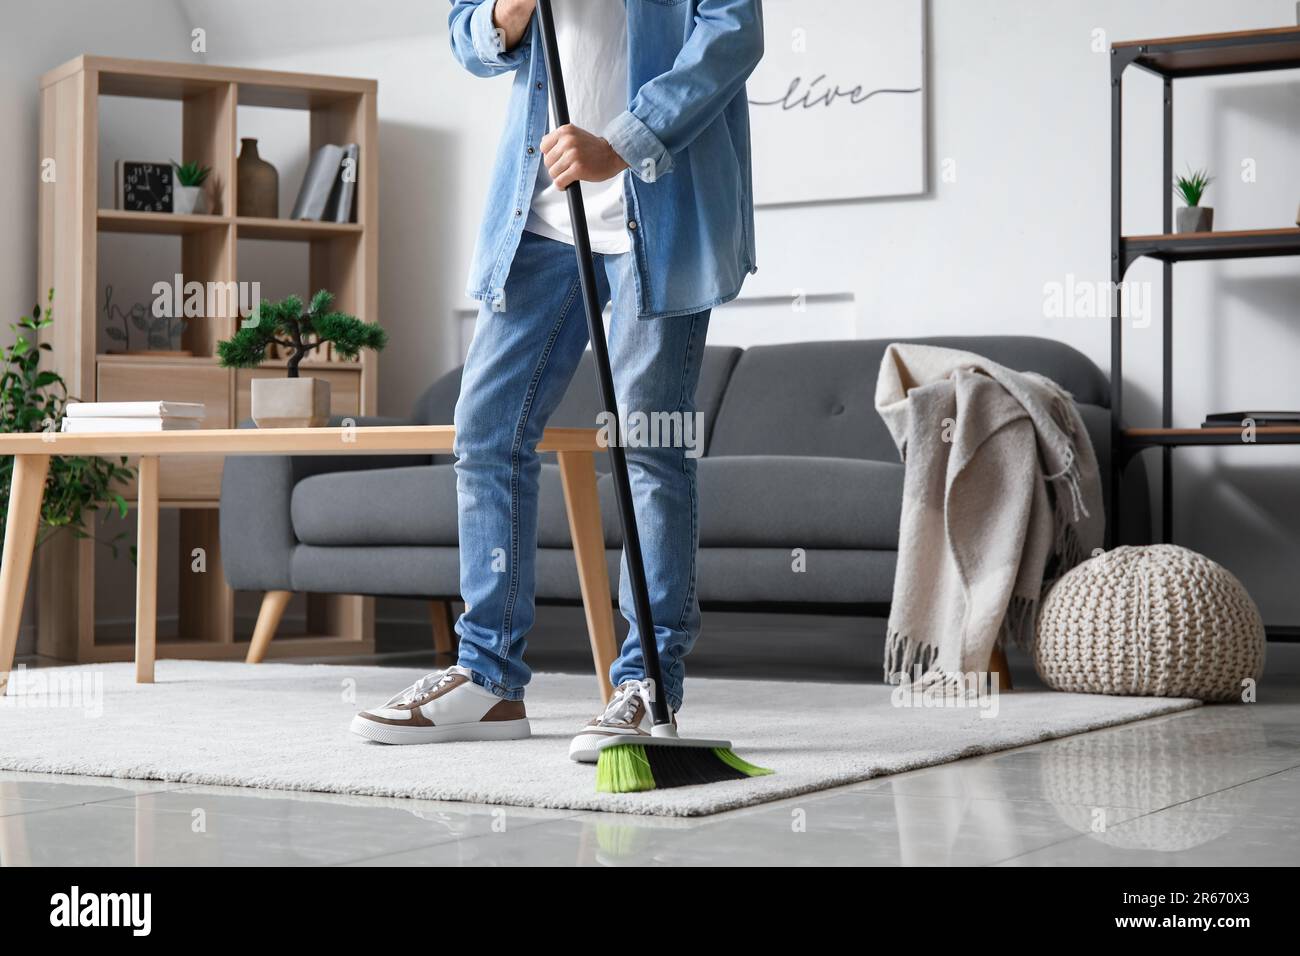 Young man sweeping carpet with broom at home Stock Photo